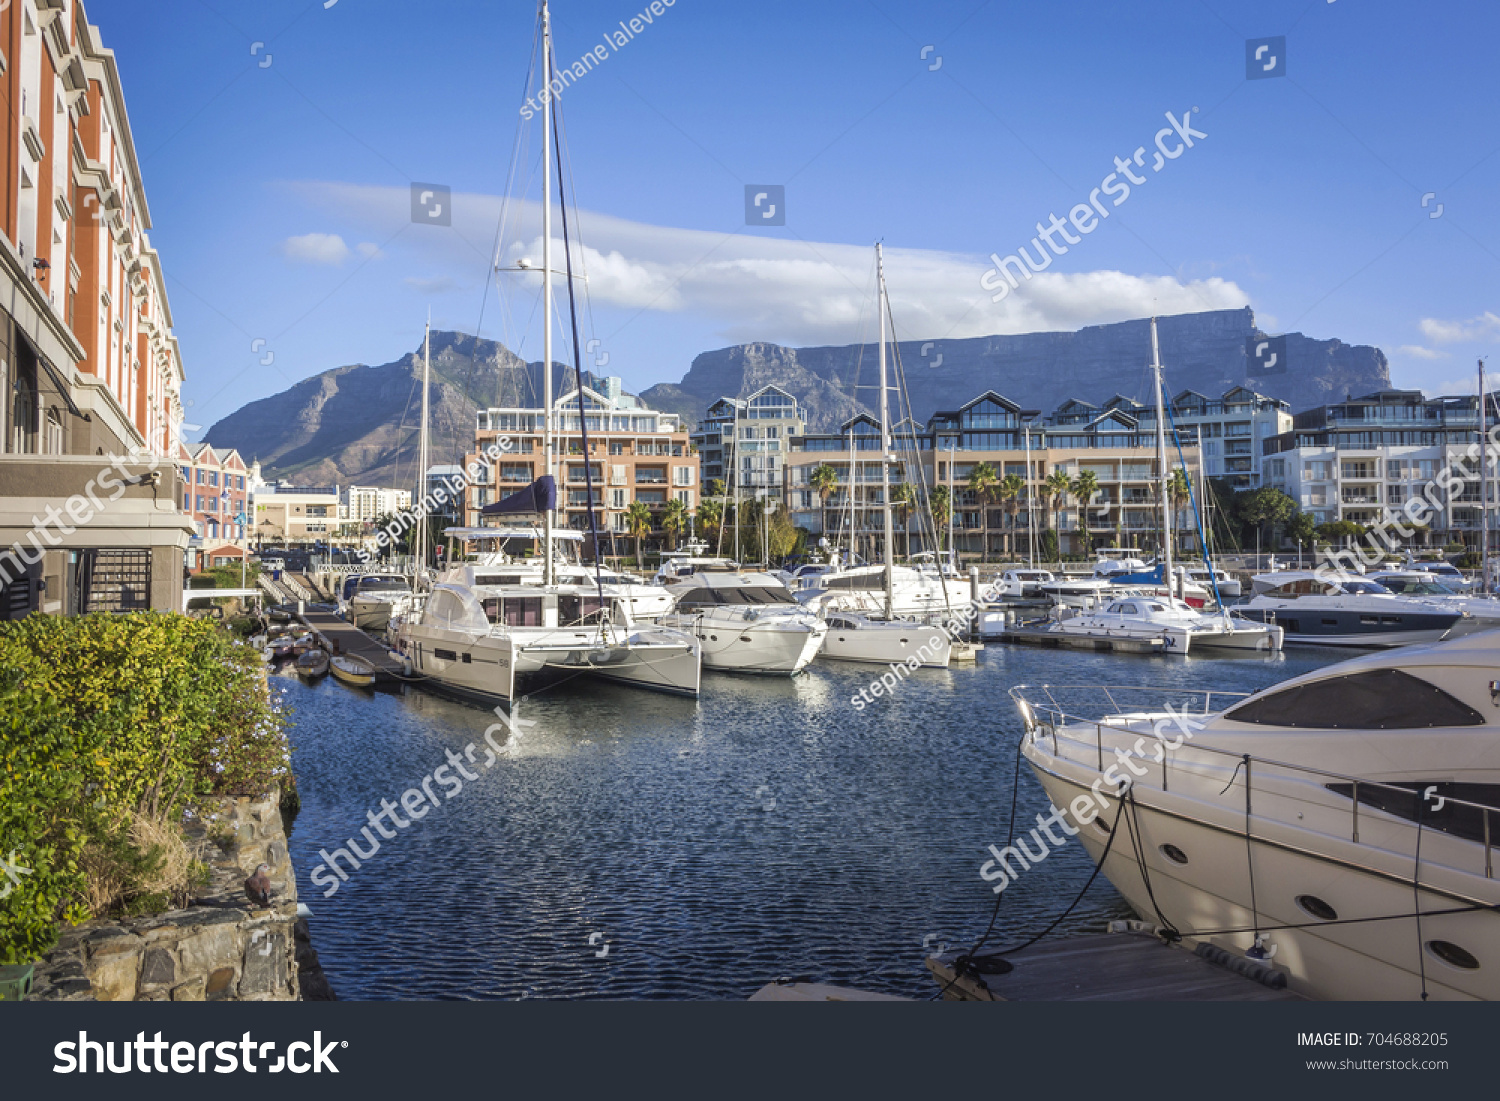 Famous V&A waterfront of Cape Town, SOUTH AFRICA, with table mountain background on the sunny day #704688205